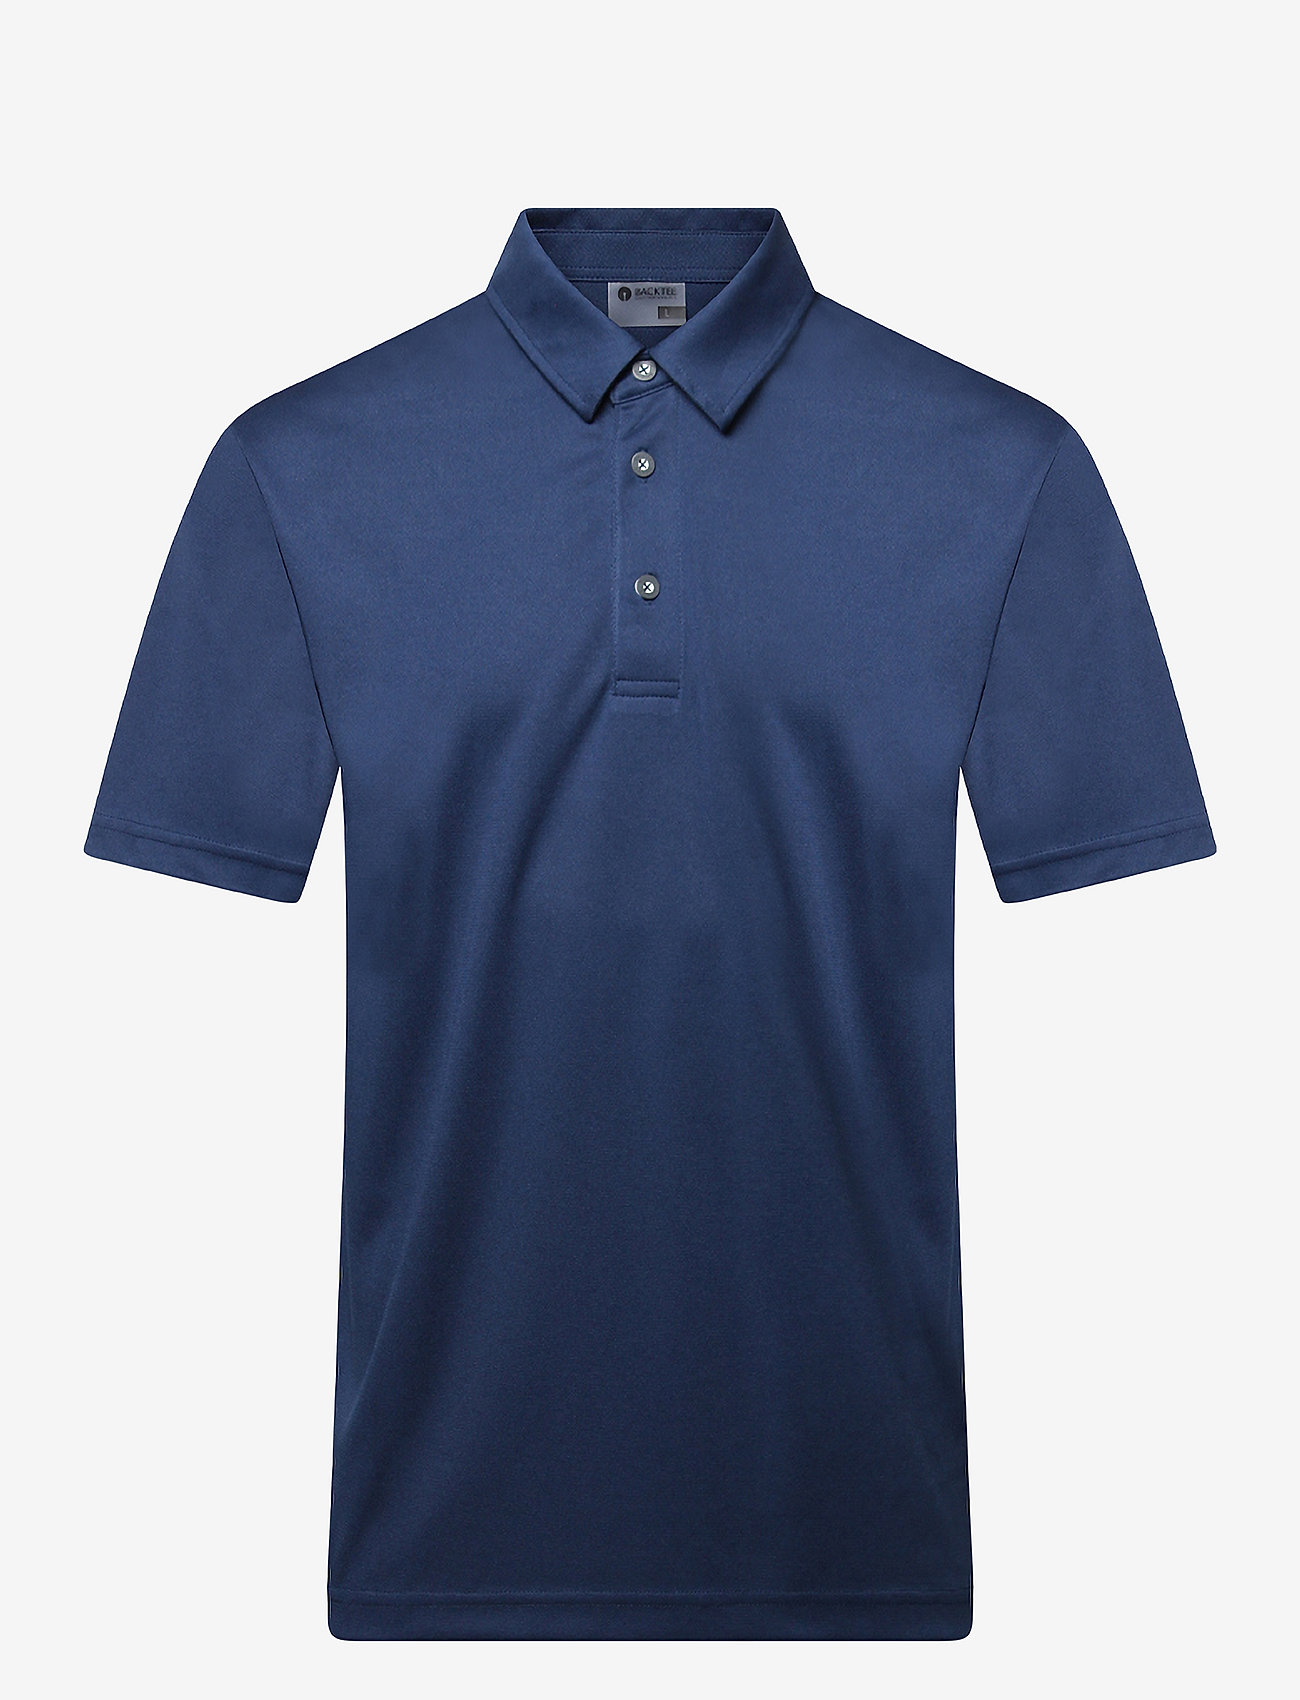 BACKTEE - Mens Performance Polo - short-sleeved polos - navy - 0